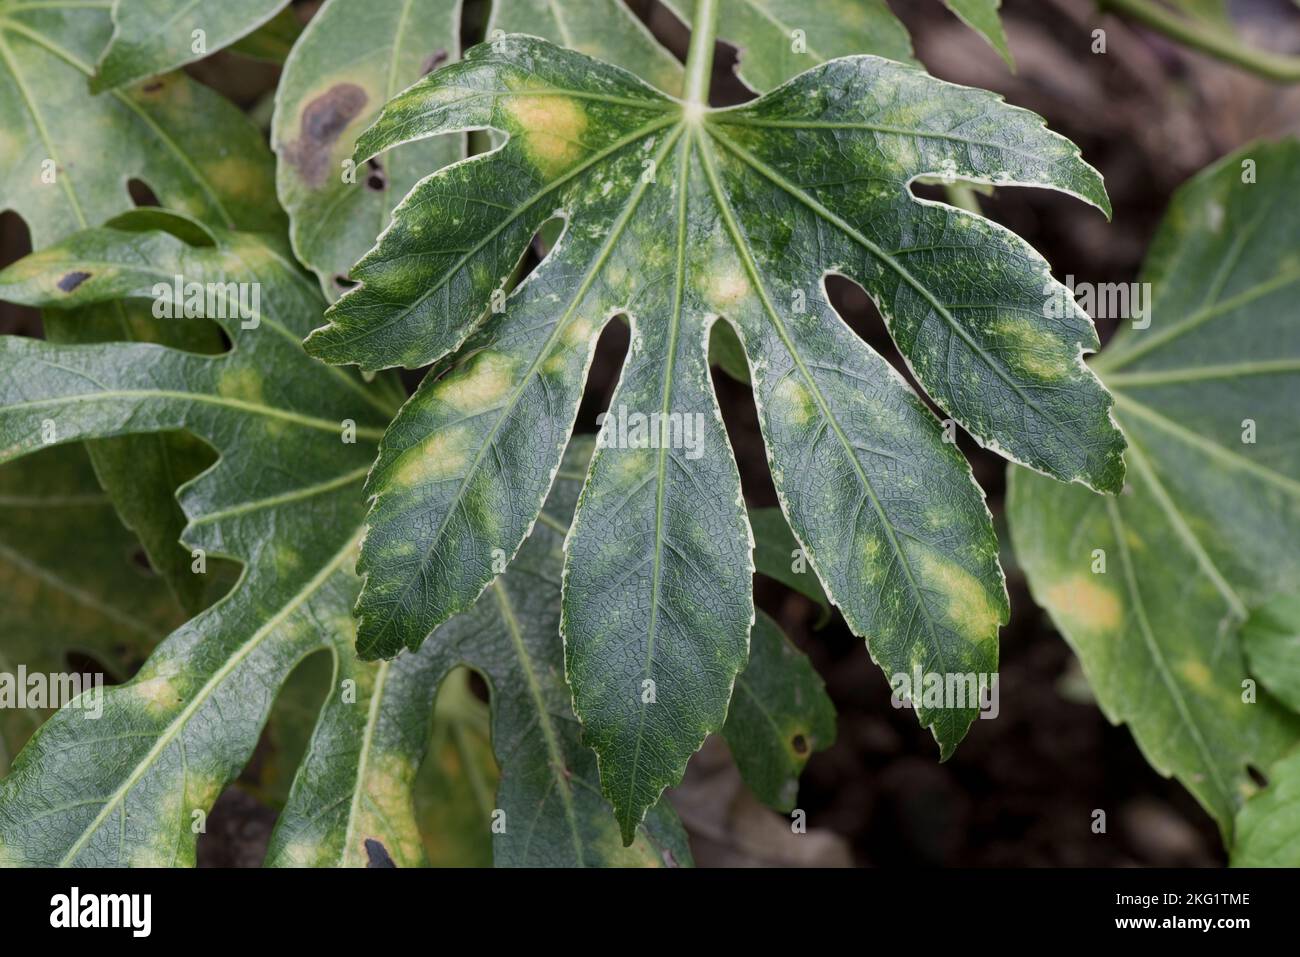 Mite type raised blister damage to the top of a Fatsia japonica, a garden ornamental, variegated leaf, the exact cause is not known, October Stock Photo